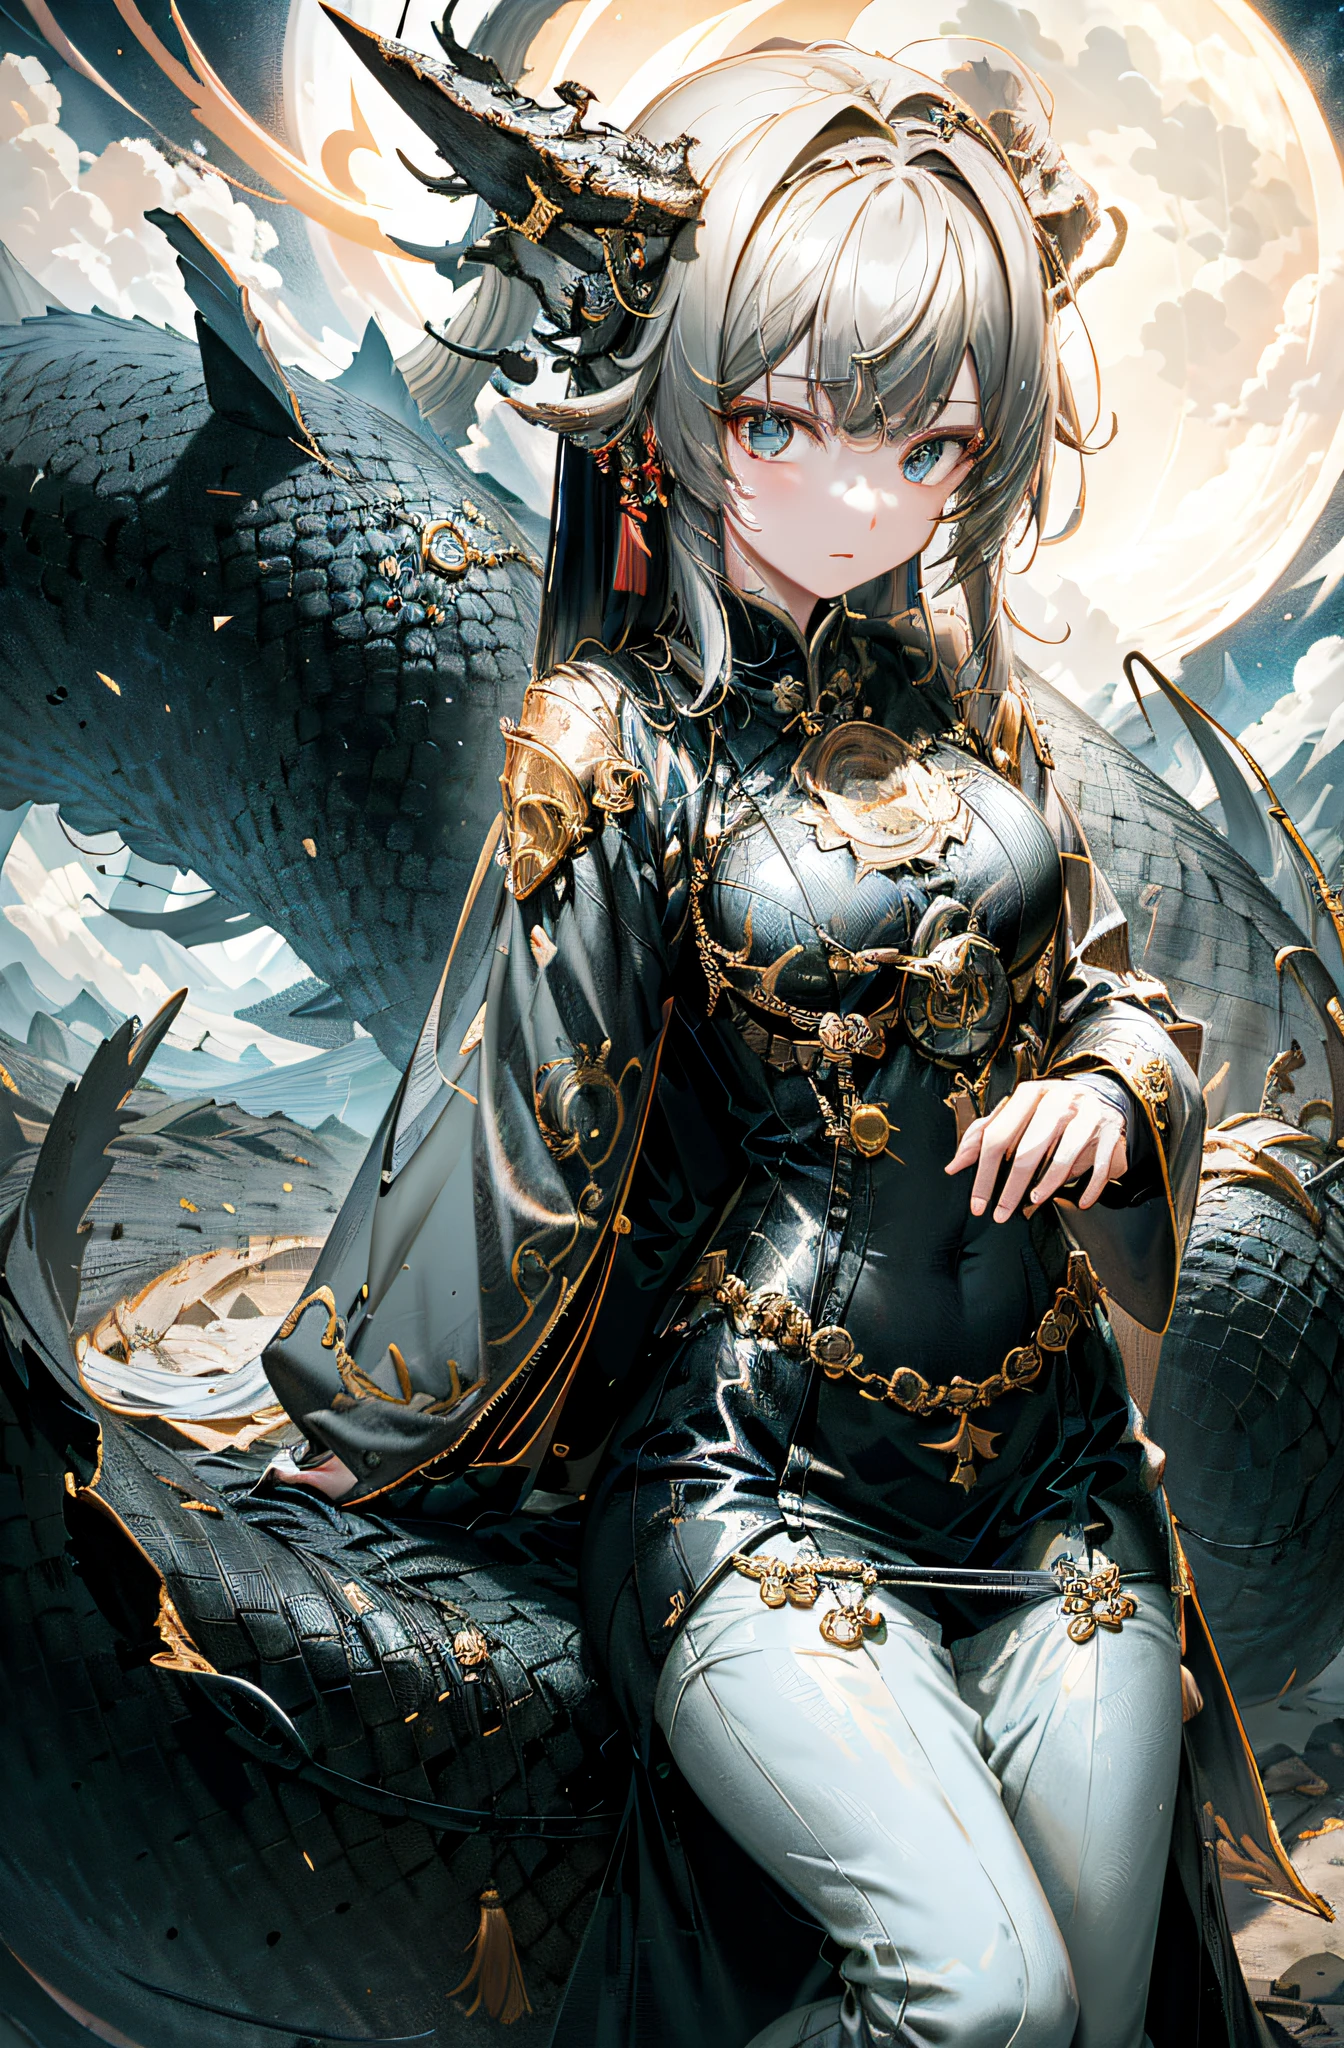 anime girl sitting on a dragon，The background is the full moon。, trending on artstation pixiv, with scaly-looking armor, by Yang J, Guweiz on ArtStation Pixiv, Guweiz in Pixiv ArtStation, Anime fantasy illustration, Detailed digital anime art, Fanart Meilleure ArtStation, drak, Keqing from Genshin Impact